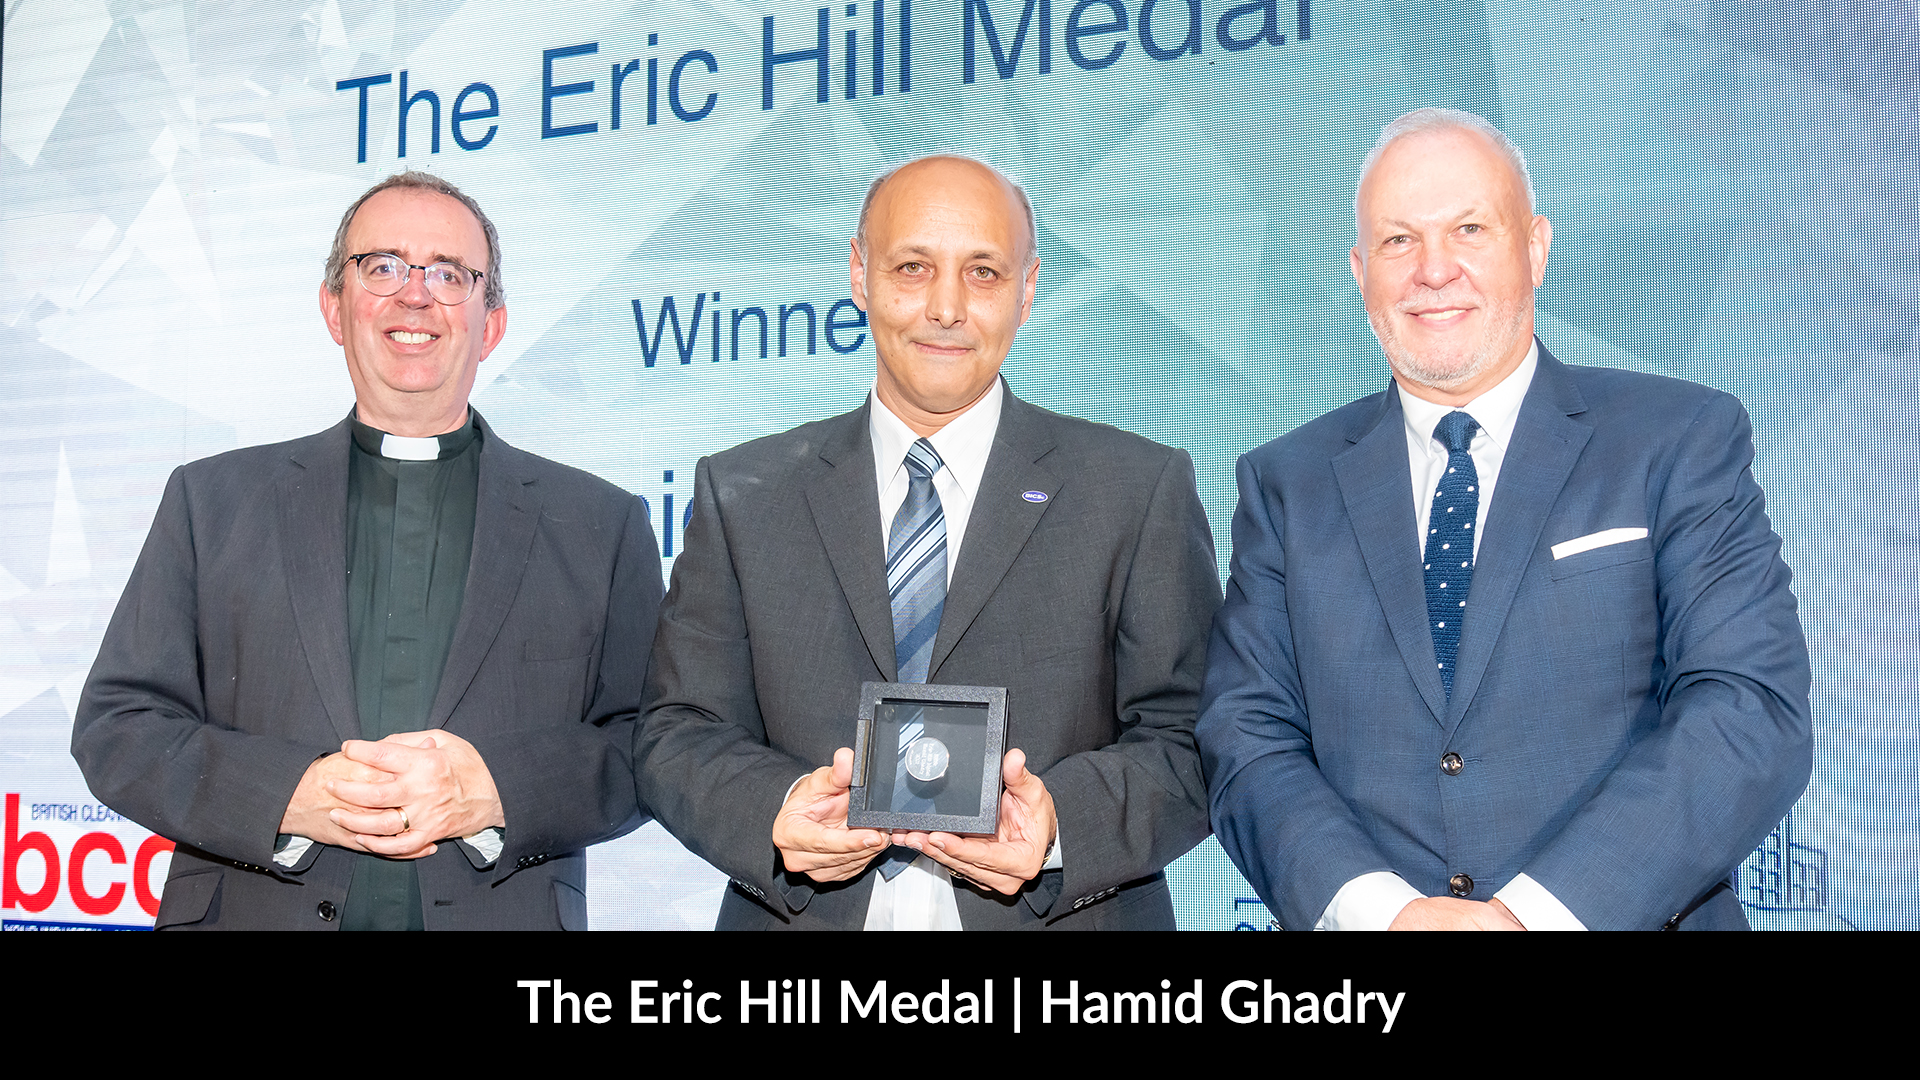 The Eric Hill Medal